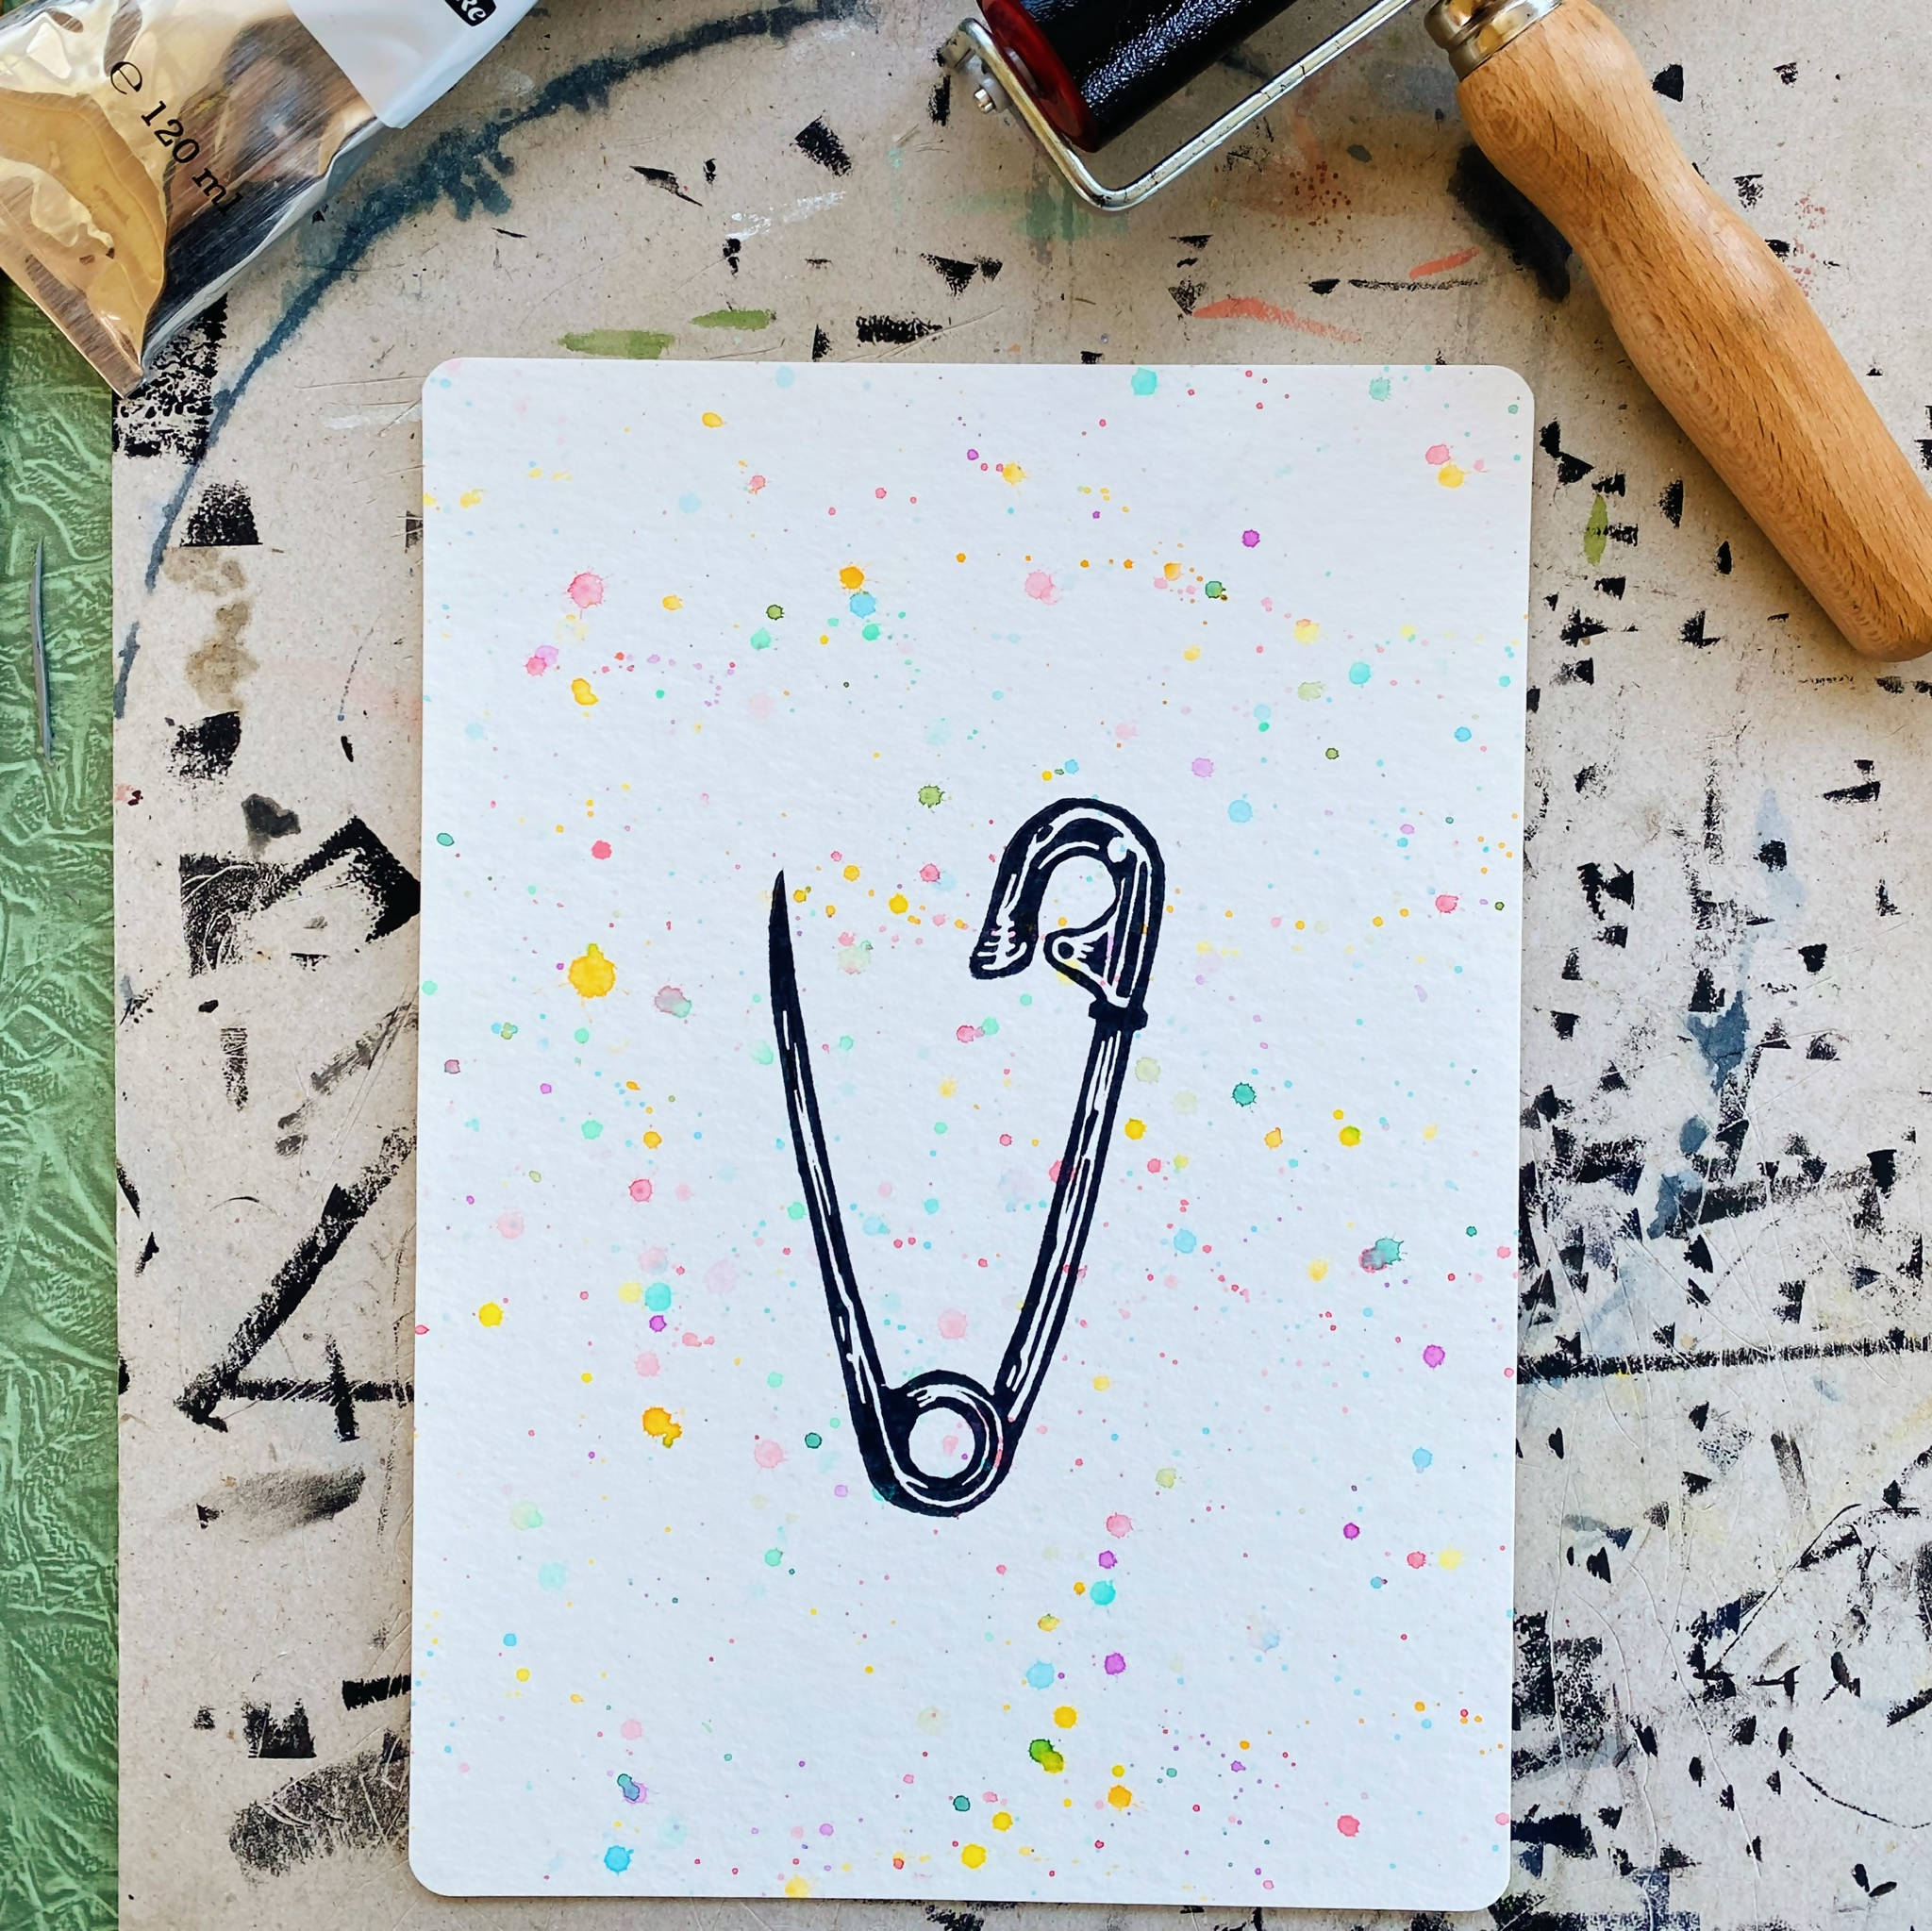 safety pin | speckled